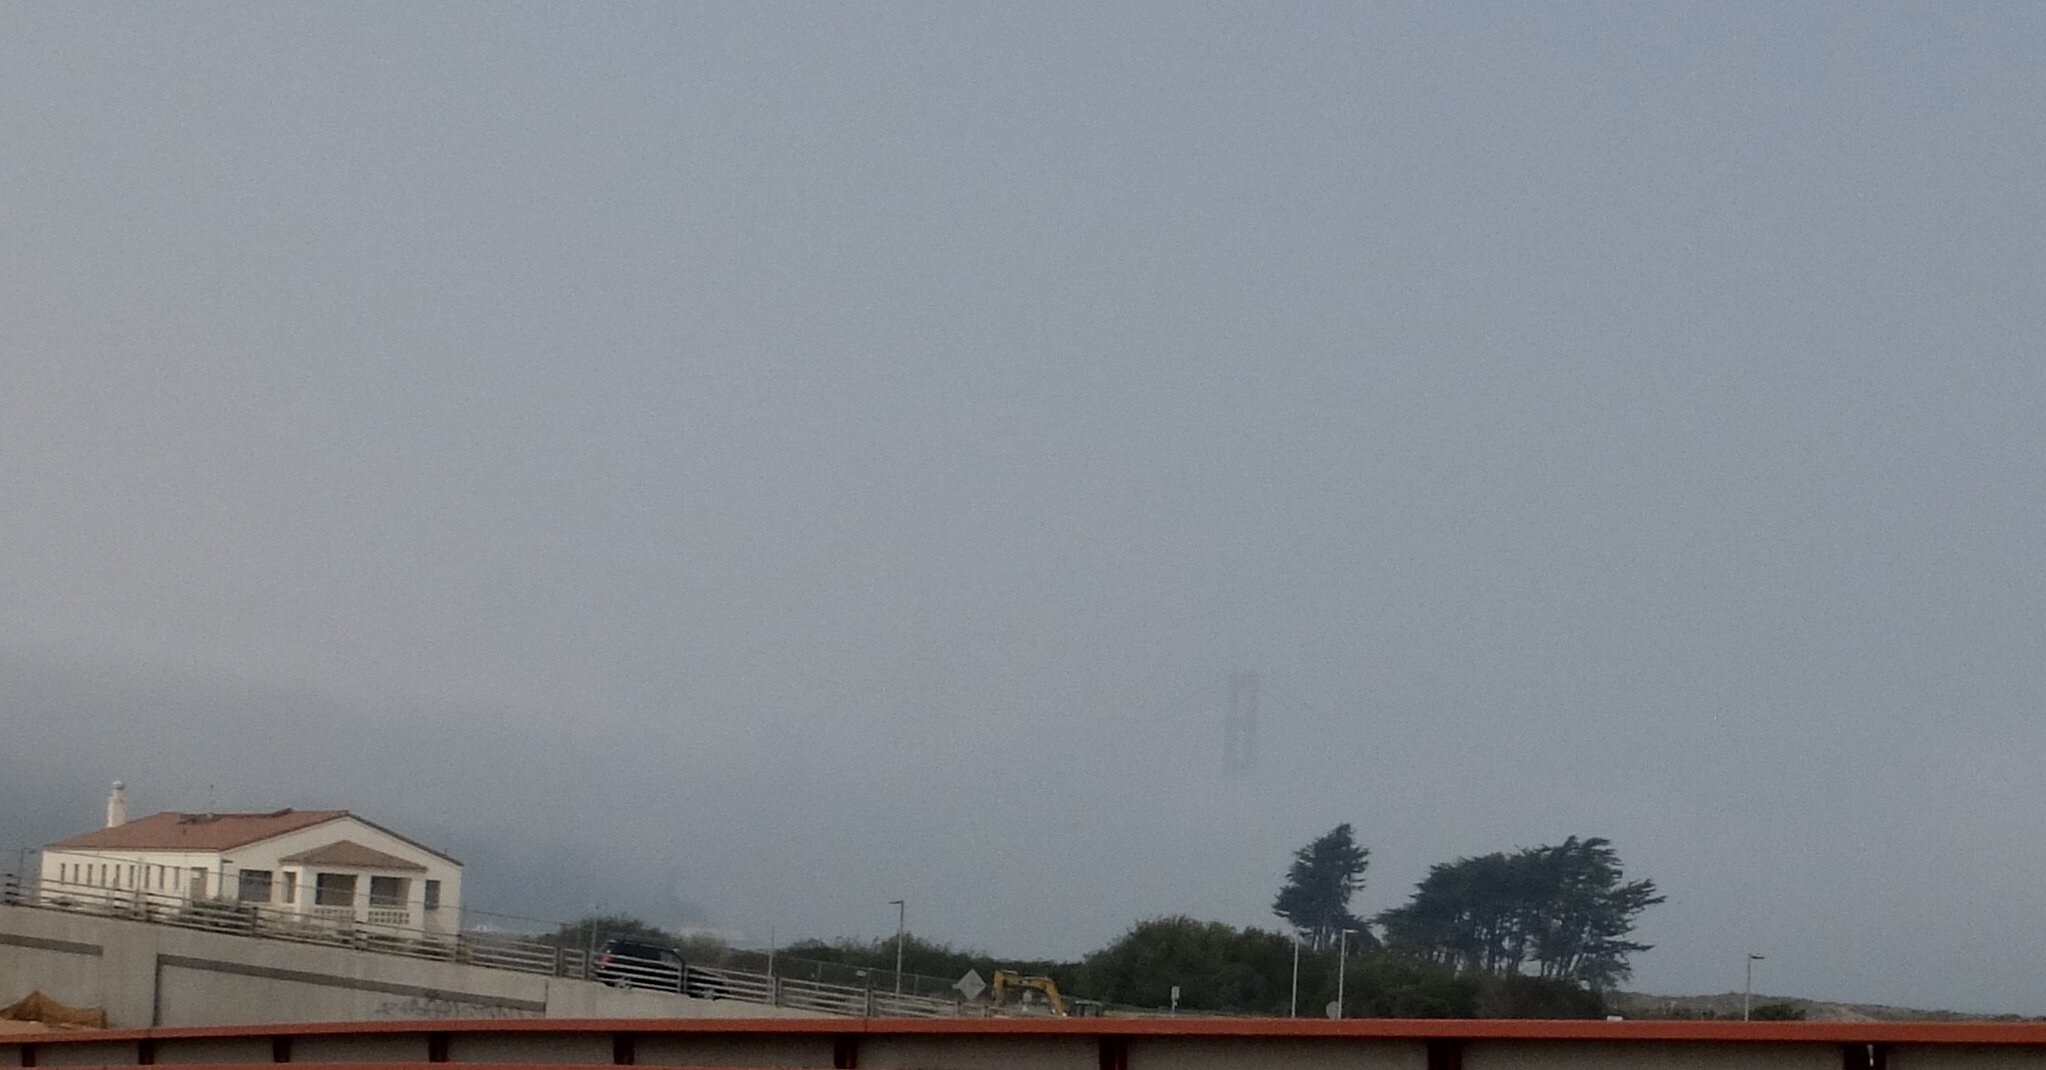  From Doyle Drive, on the approach to the barely visible Golden Gate Bridge. 